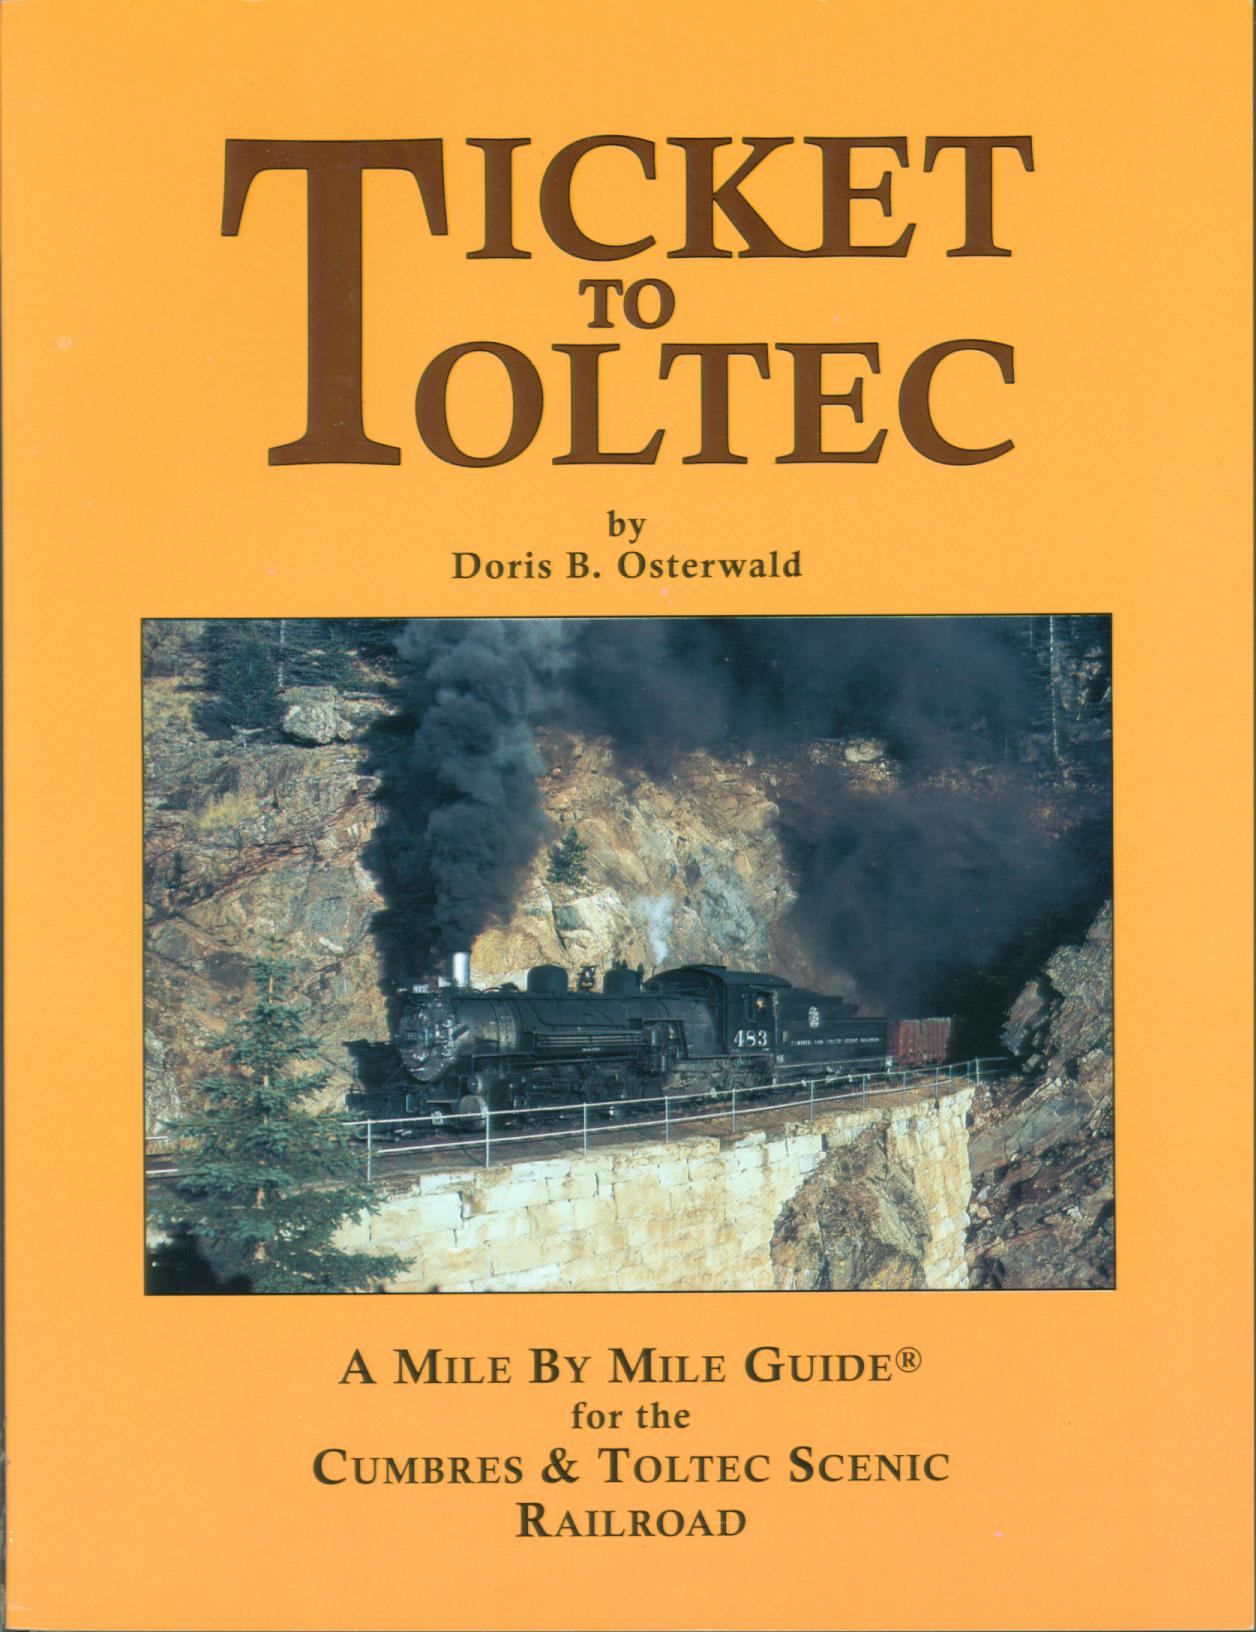 TICKET TO TOLTEC: a mile by mile guide for the Cumbres & Toltec Scenic Railroad.